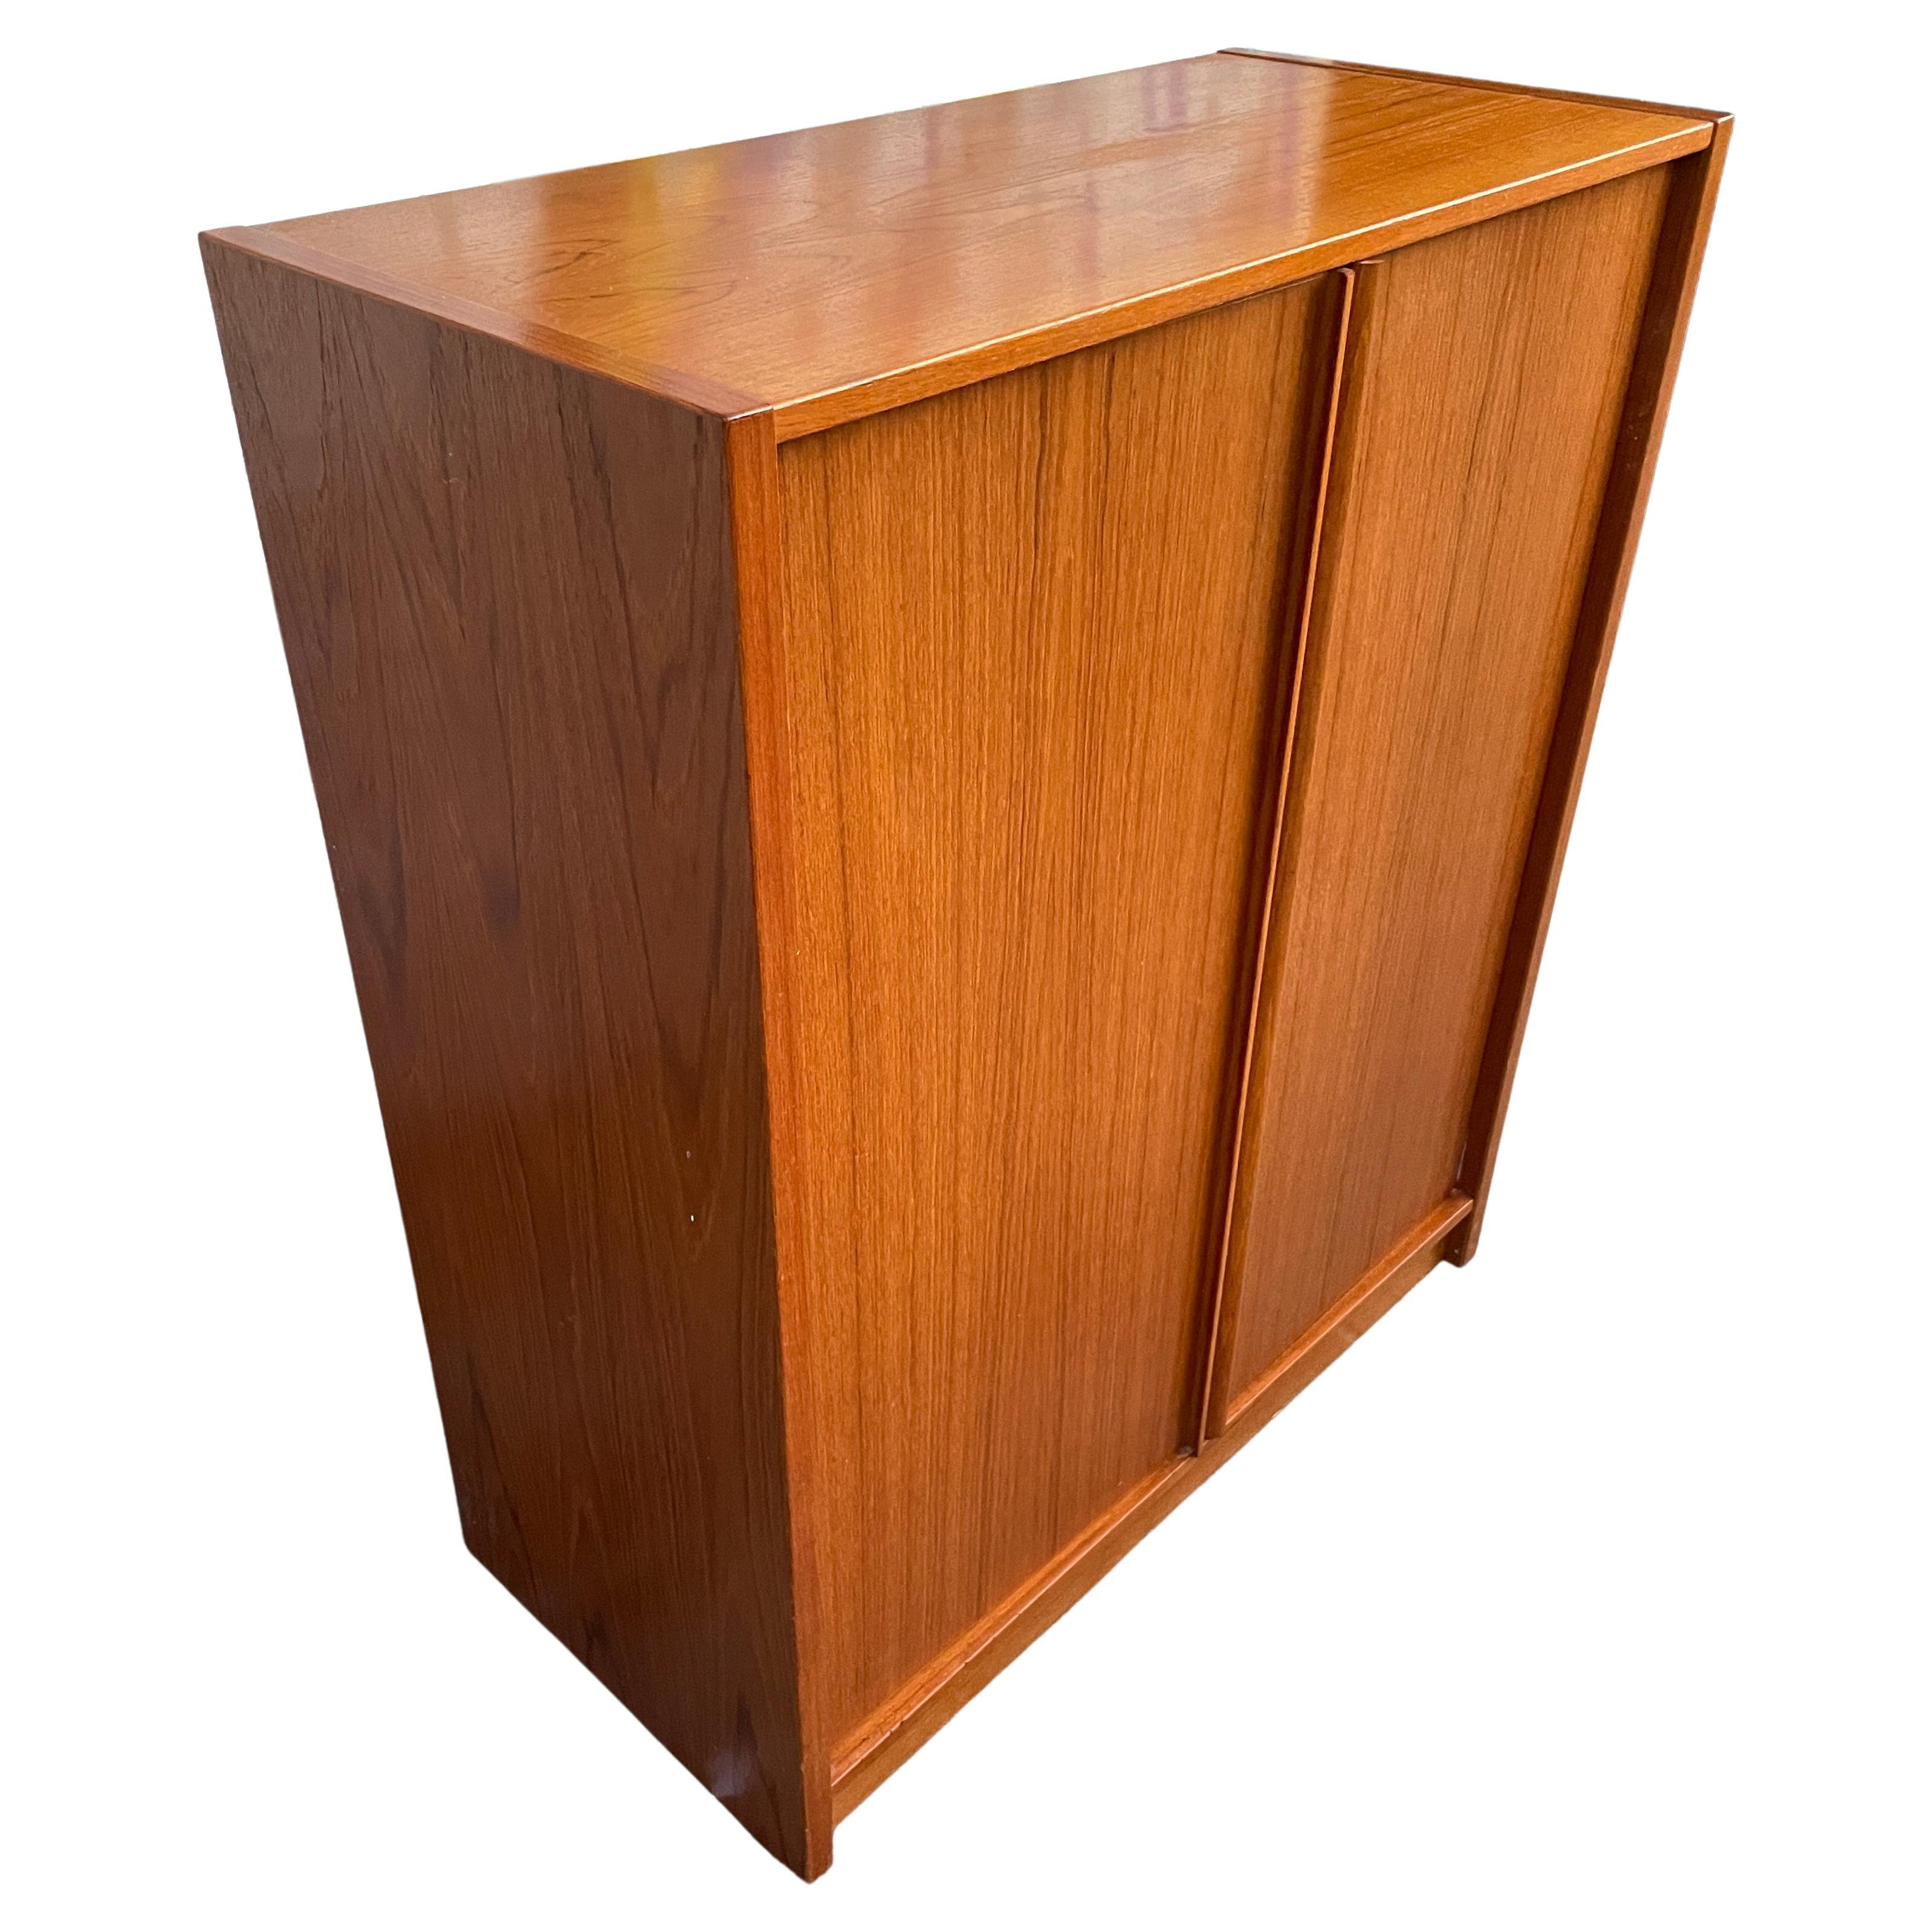 Beautiful mid-century tall teak dresser wardrobe 6-drawer on left and 3 shelves on the right behind 2 beautiful cabinet doors. Clean inside and out all drawers slide smooth. Made in Denmark. Very Good vintage condition. Located in Brooklyn NYC.